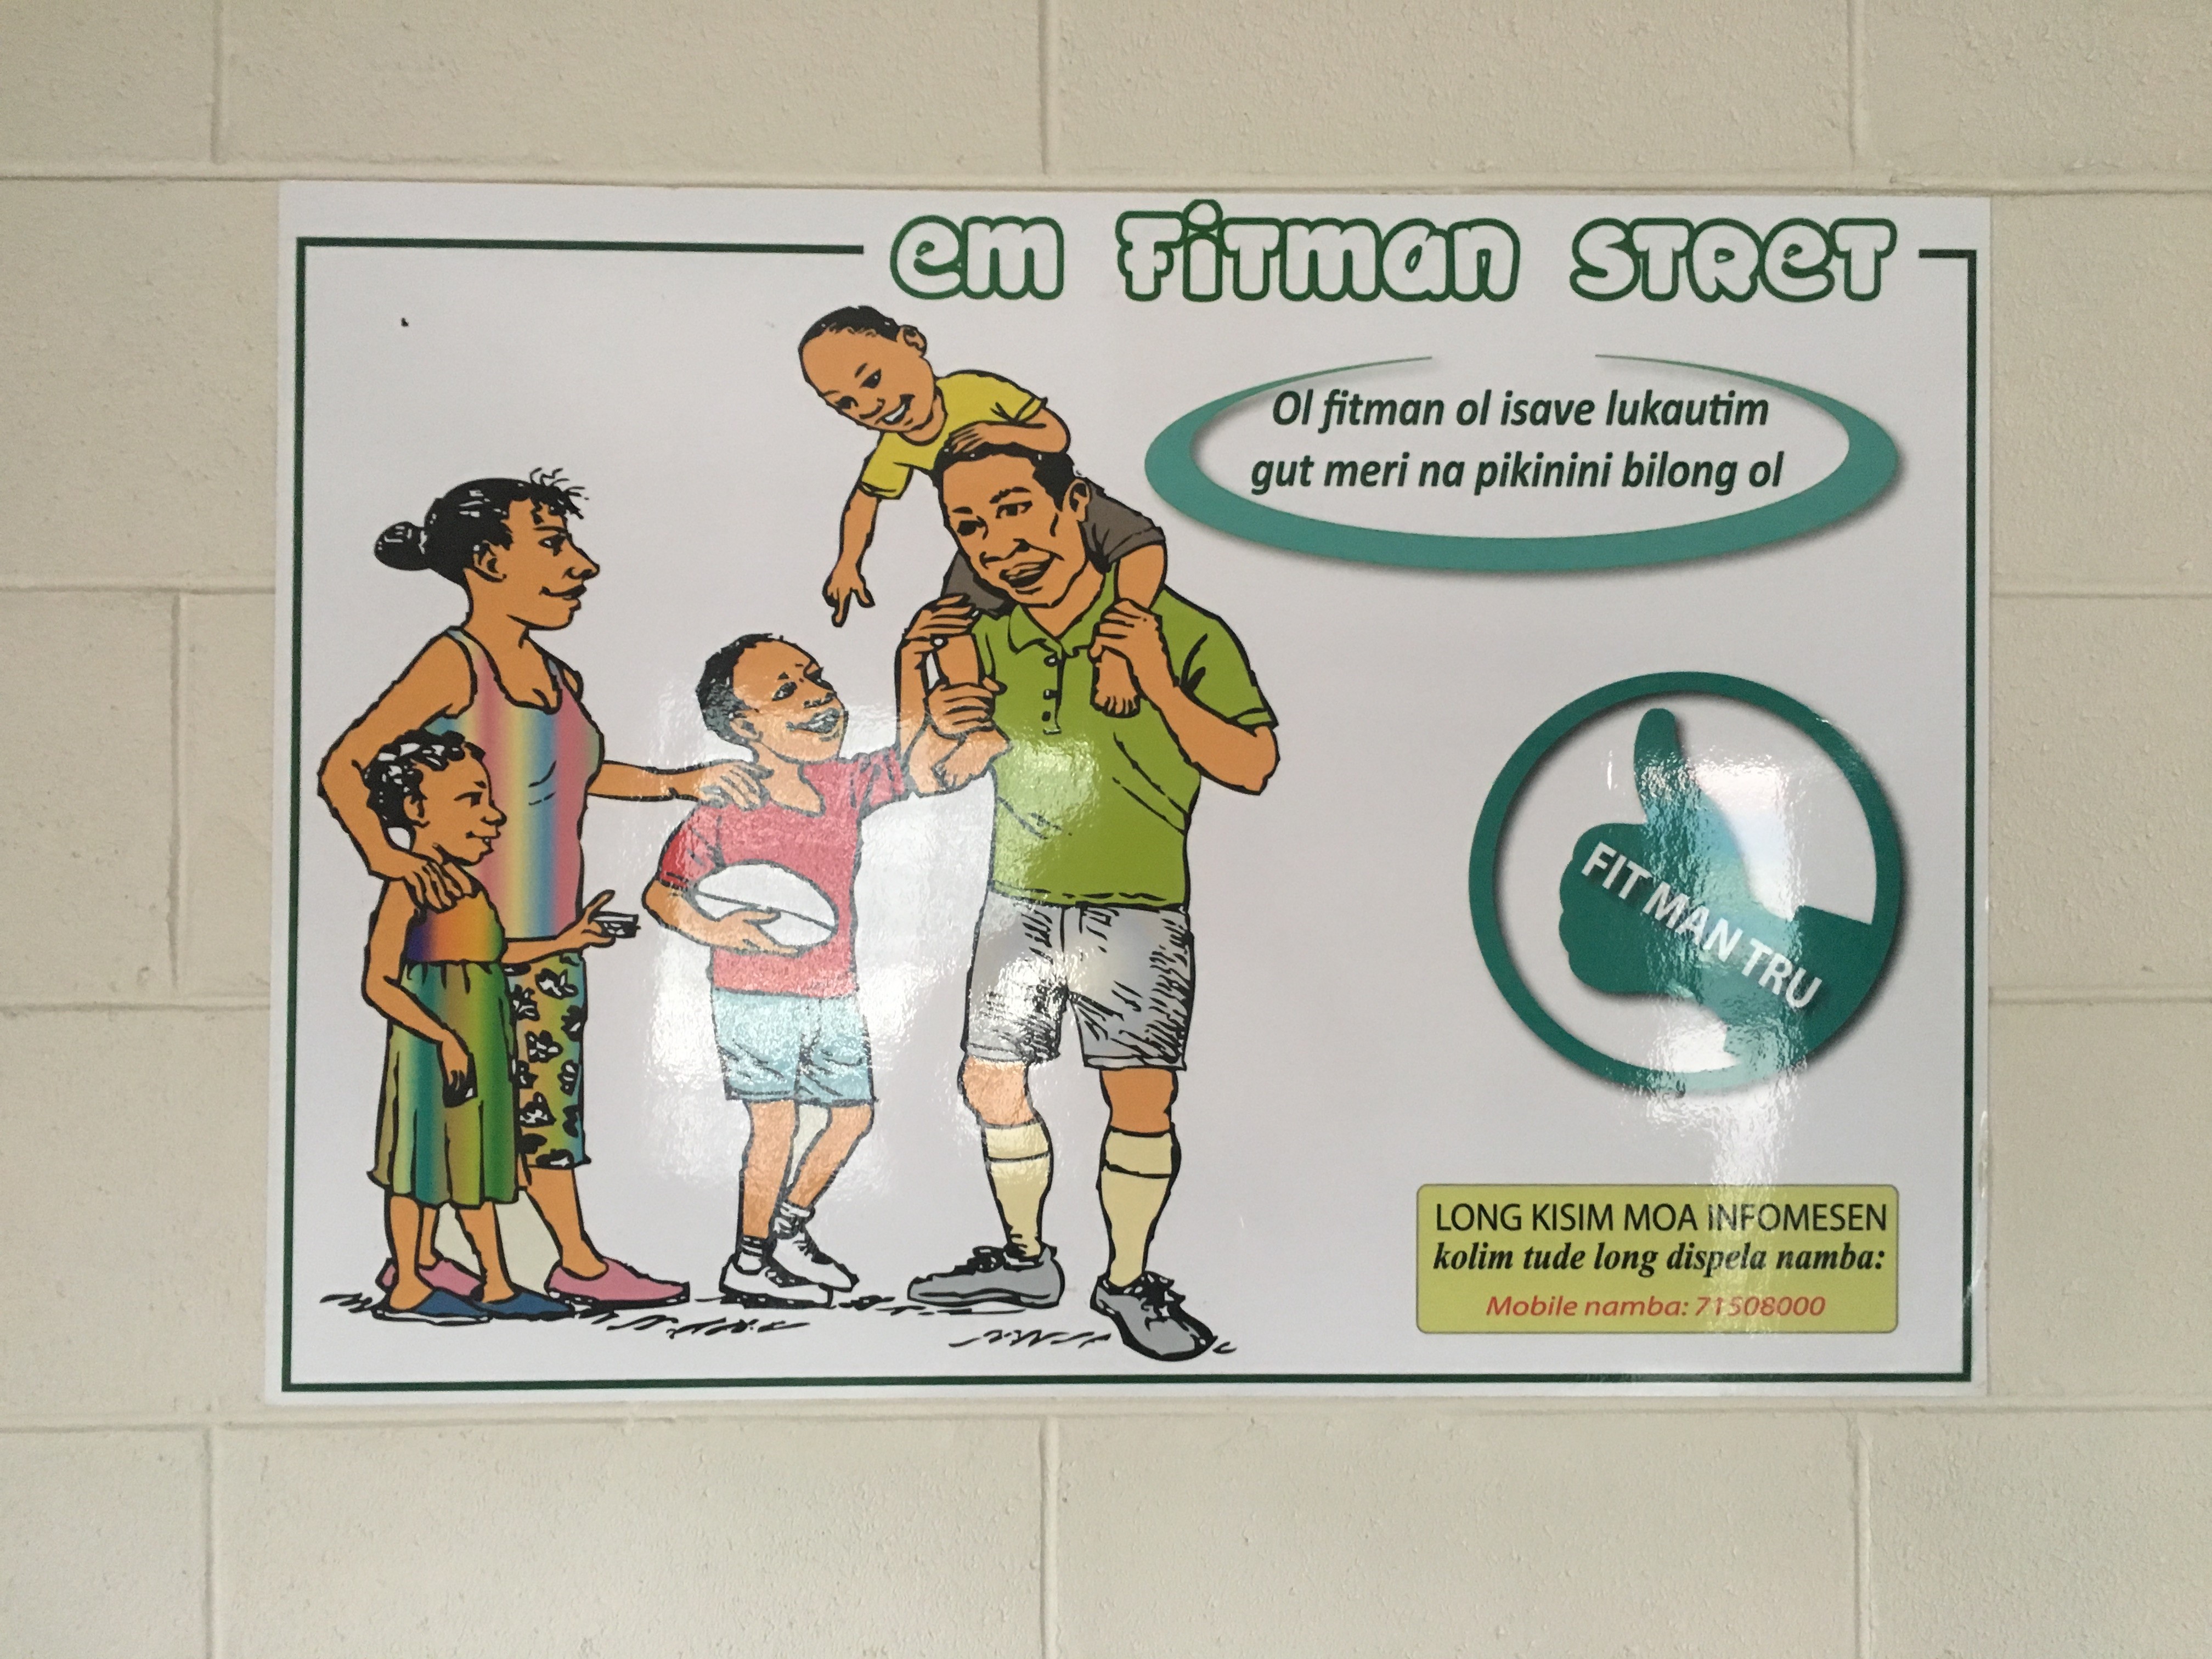 A poster inside the Seventh Day Adventist Church building in Lae (Credit: Michelle N Rooney)